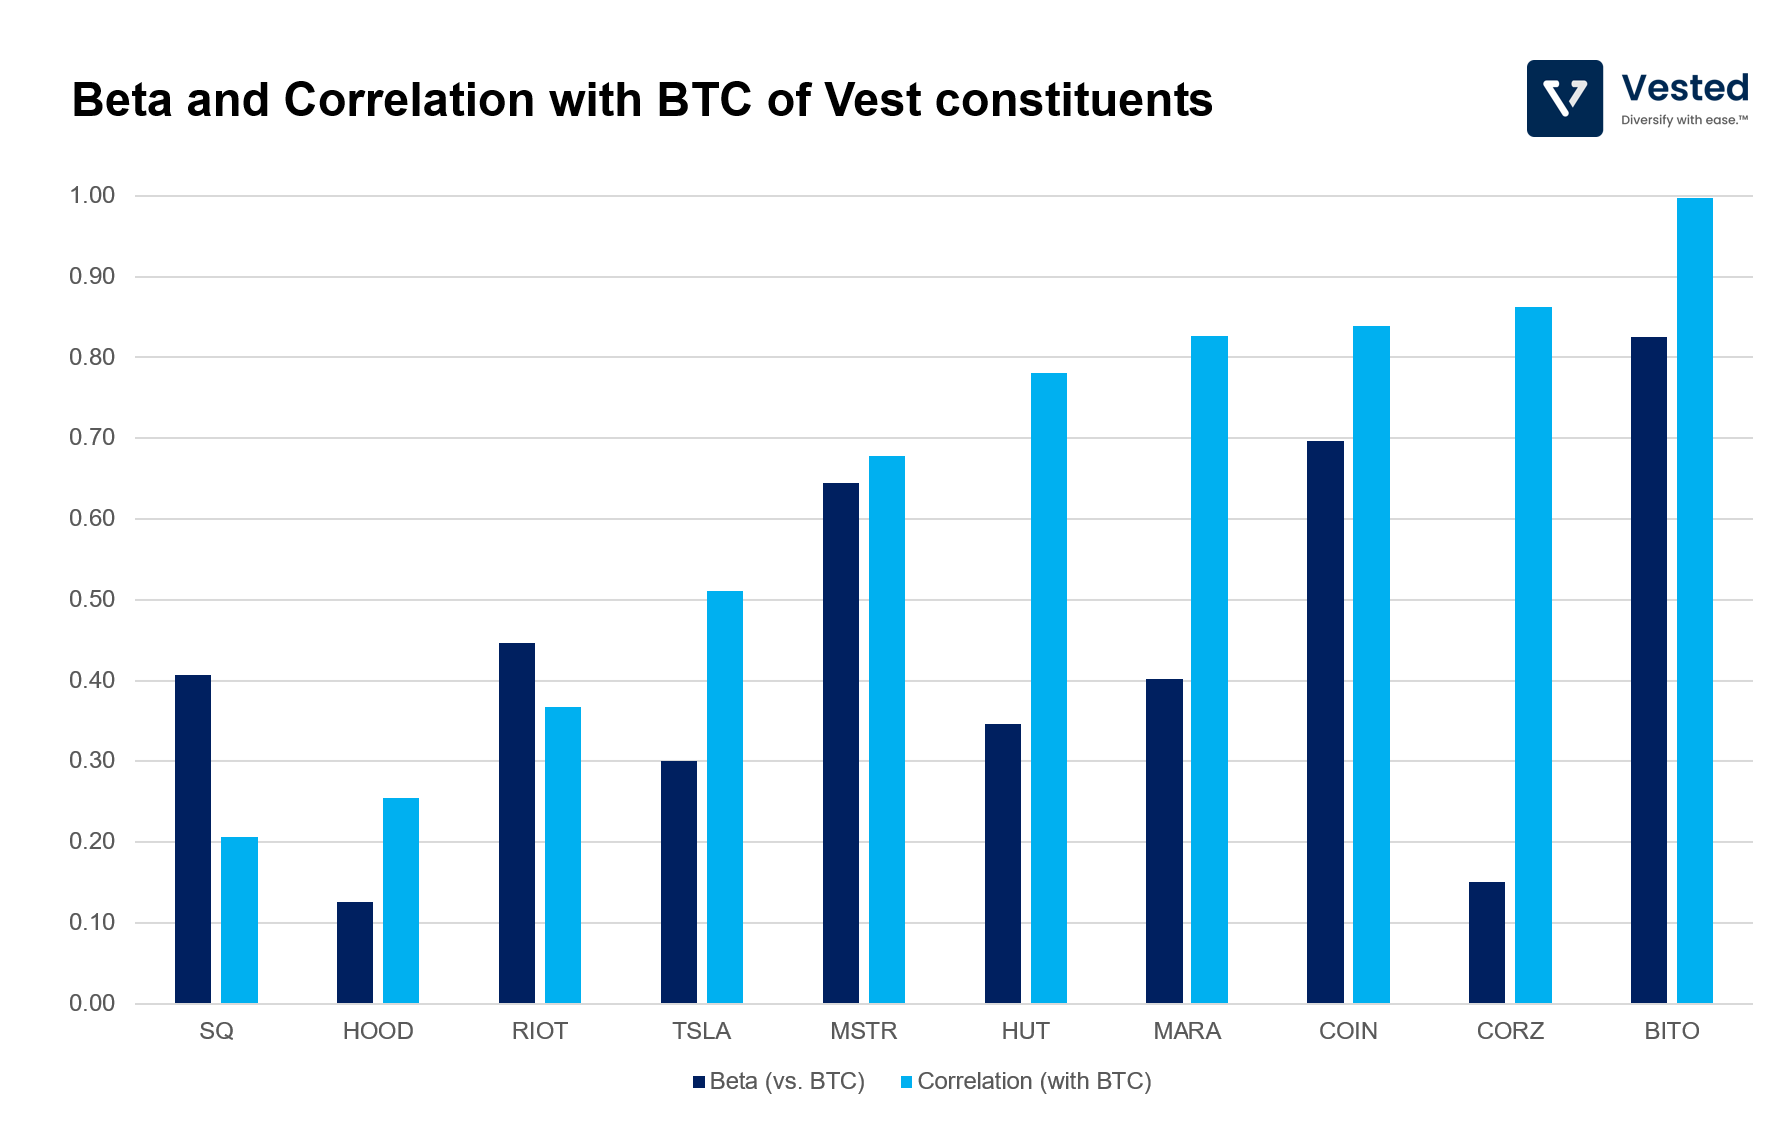 Beta and Correlation with BTC of Vest constituents. Calculations were performed using available historical data (April 2021 - now). Calculations for CORZ, BITO and HOOD were done with more recent data as they became publicly listed companies after April 2021.